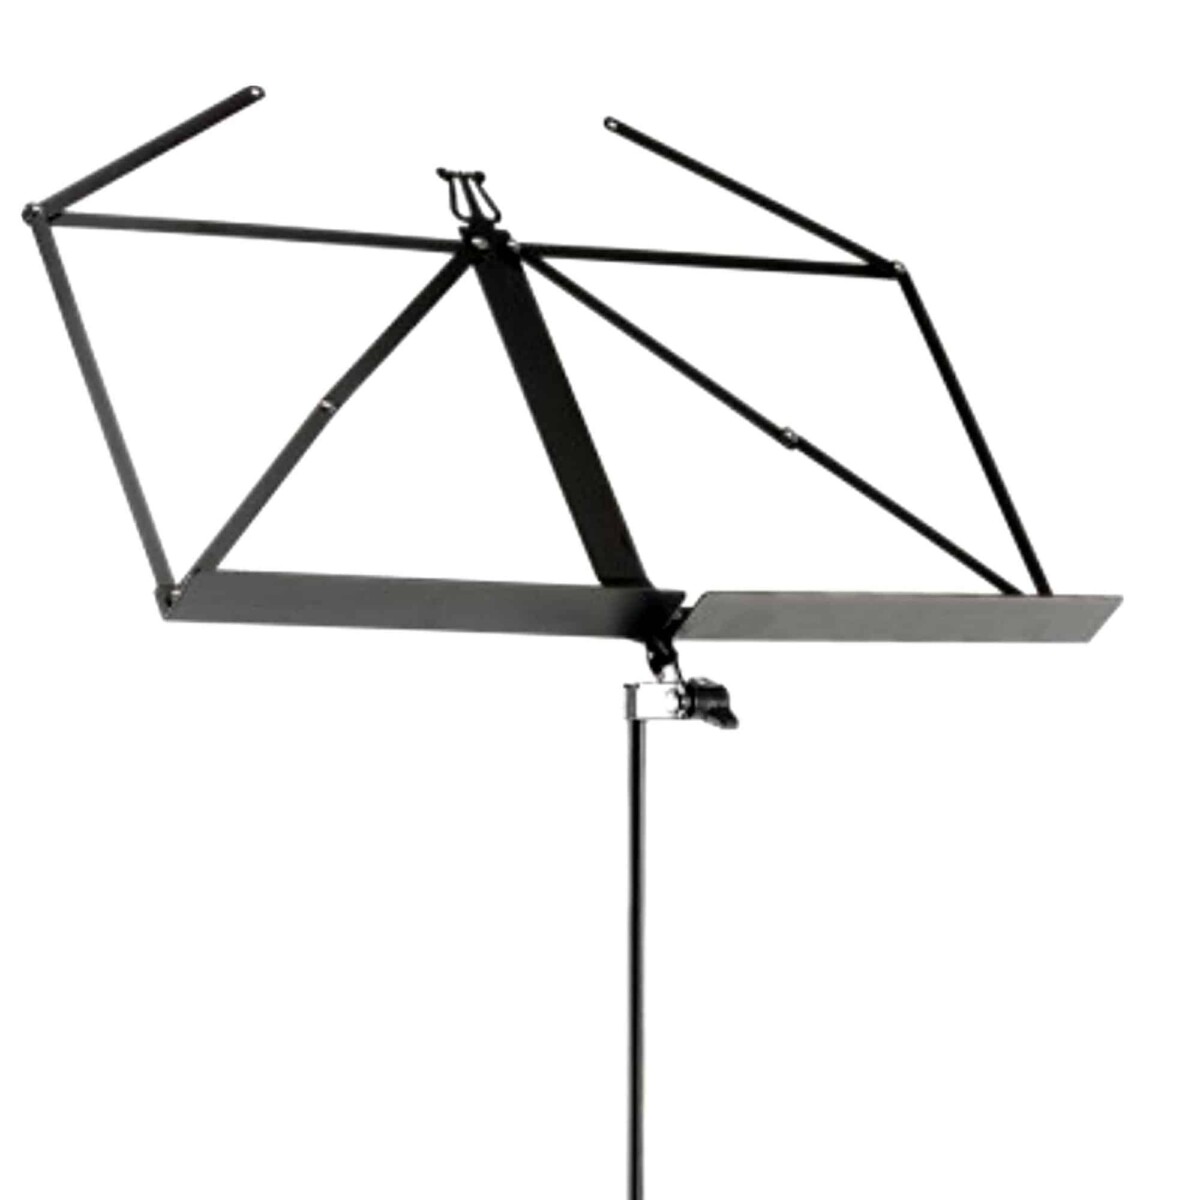 Stagg MUSQ3 Music Stand Foldable Black 3 Sections